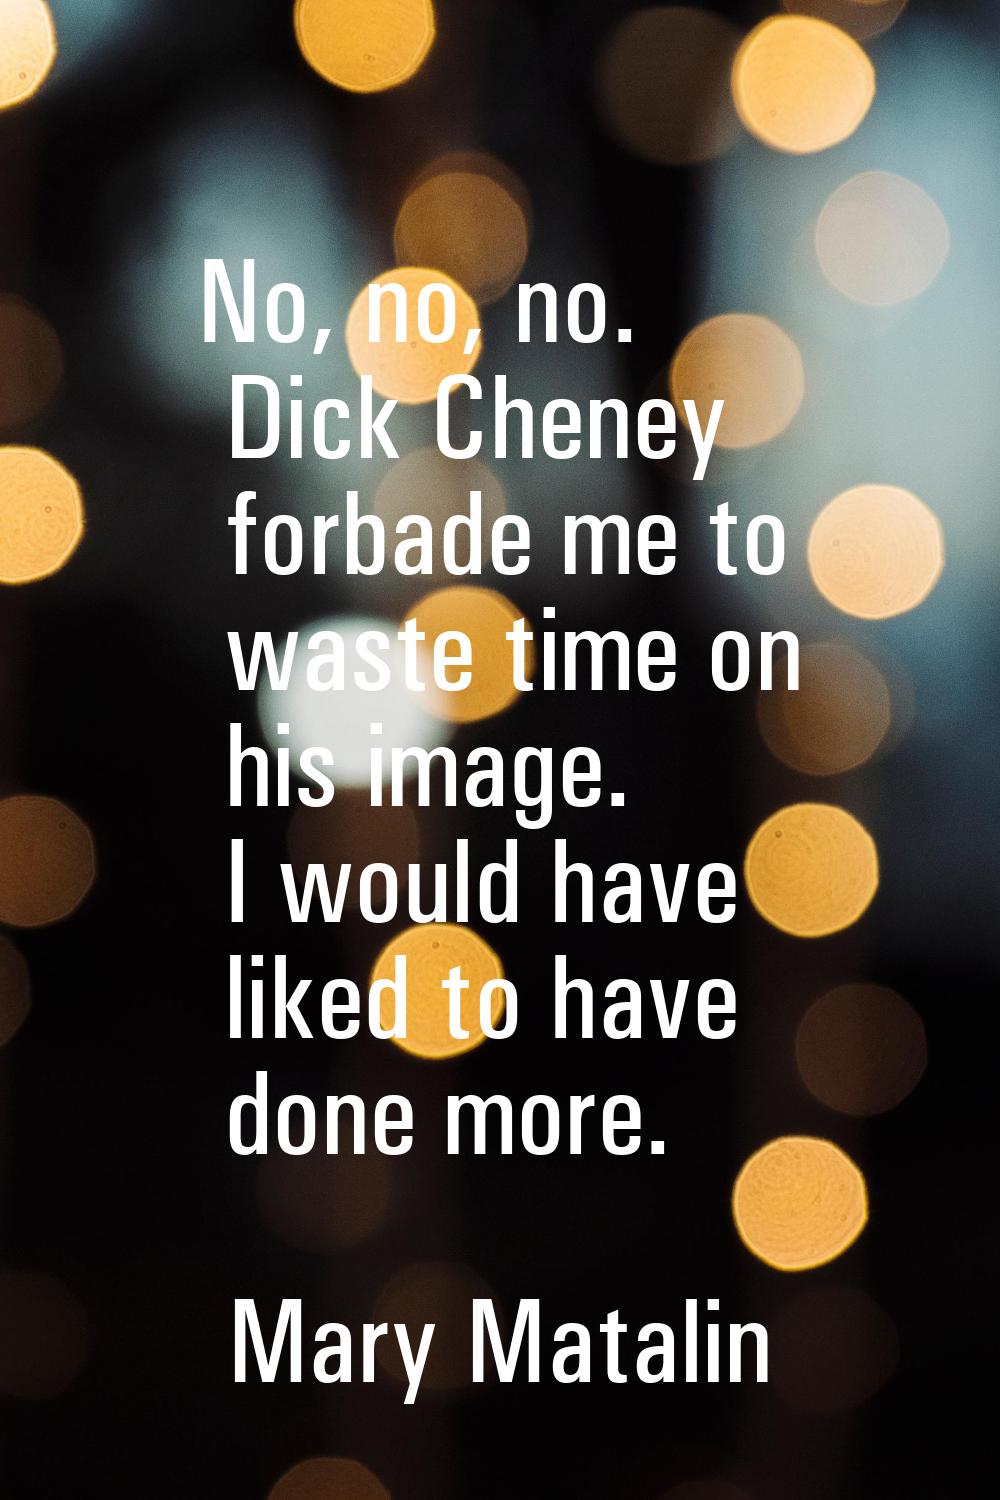 No, no, no. Dick Cheney forbade me to waste time on his image. I would have liked to have done more